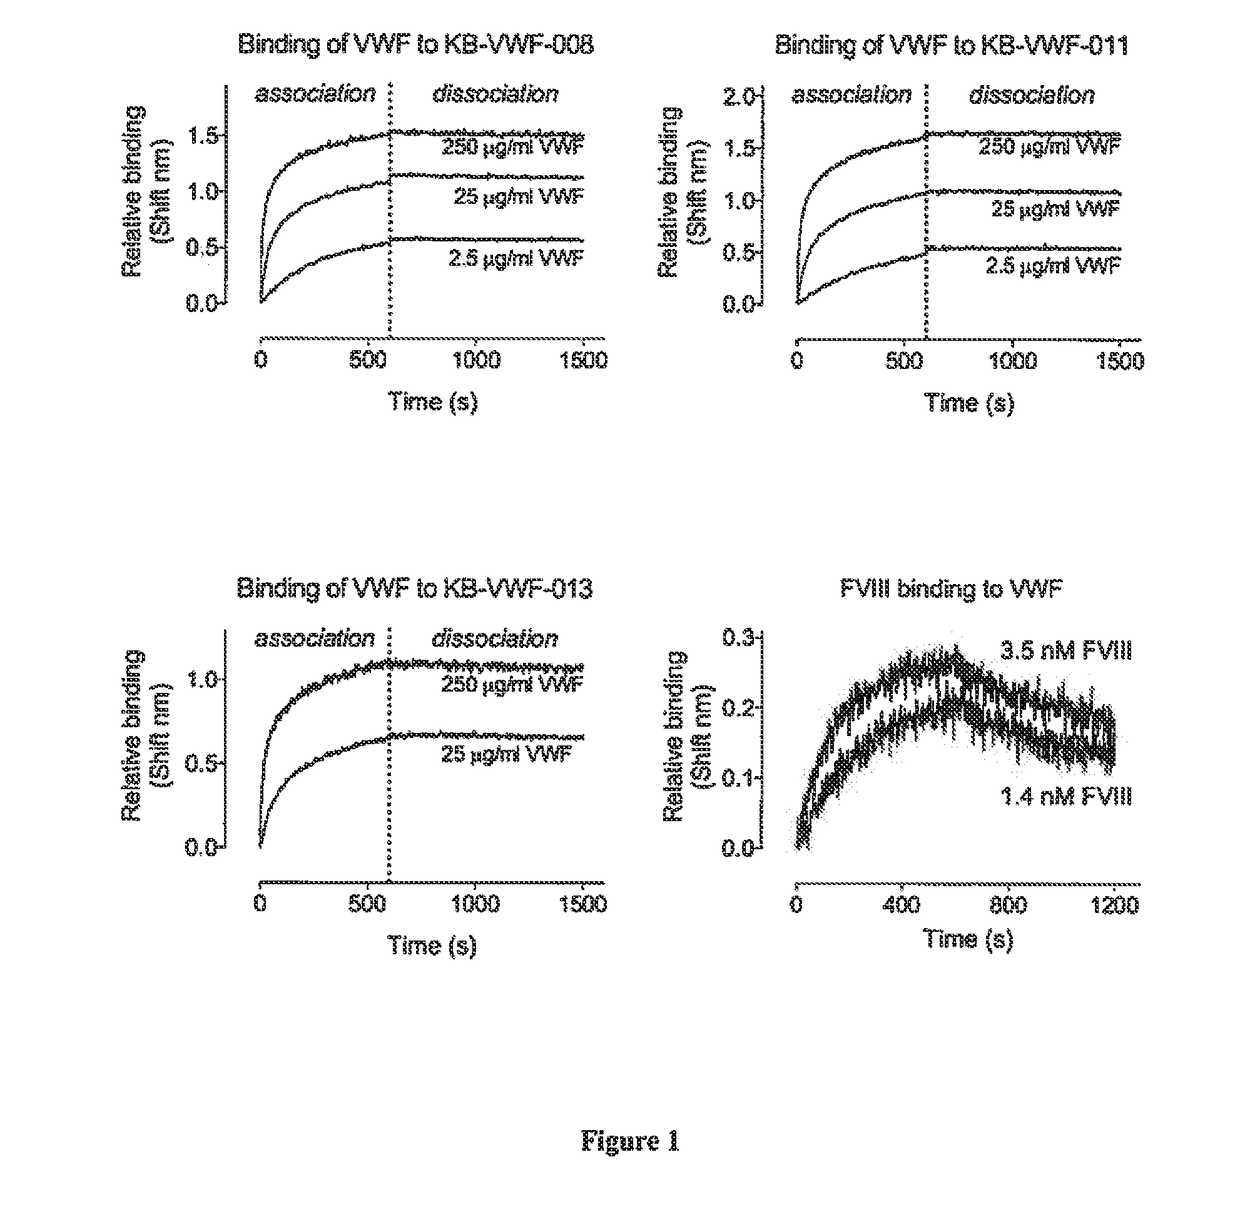 Anti-vwf d'd3 single-domain antibodies and polypeptides comprising thereof